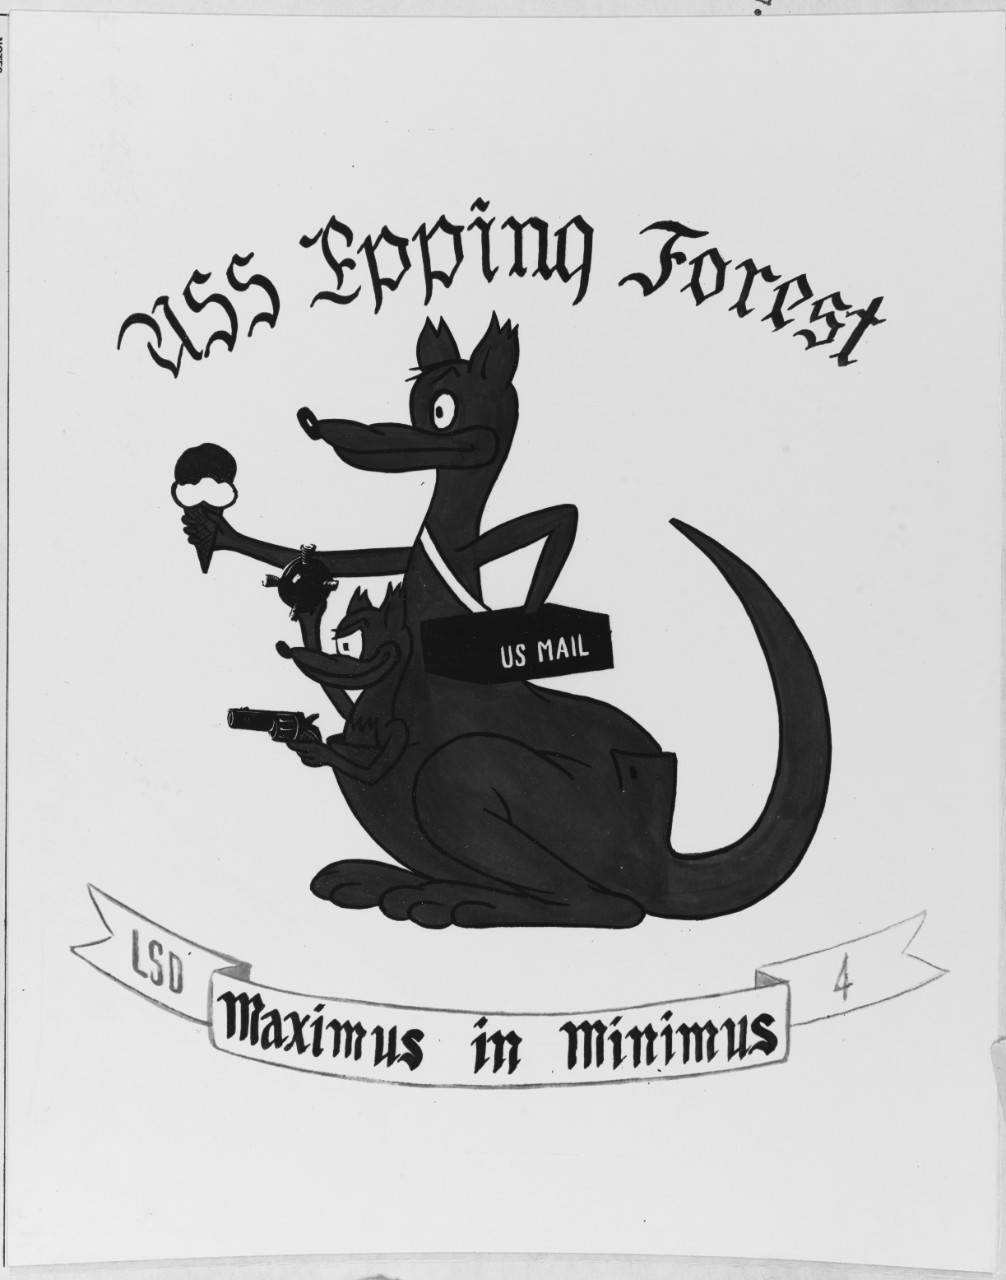 Insignia: USS EPPING FOREST (LSD-4)